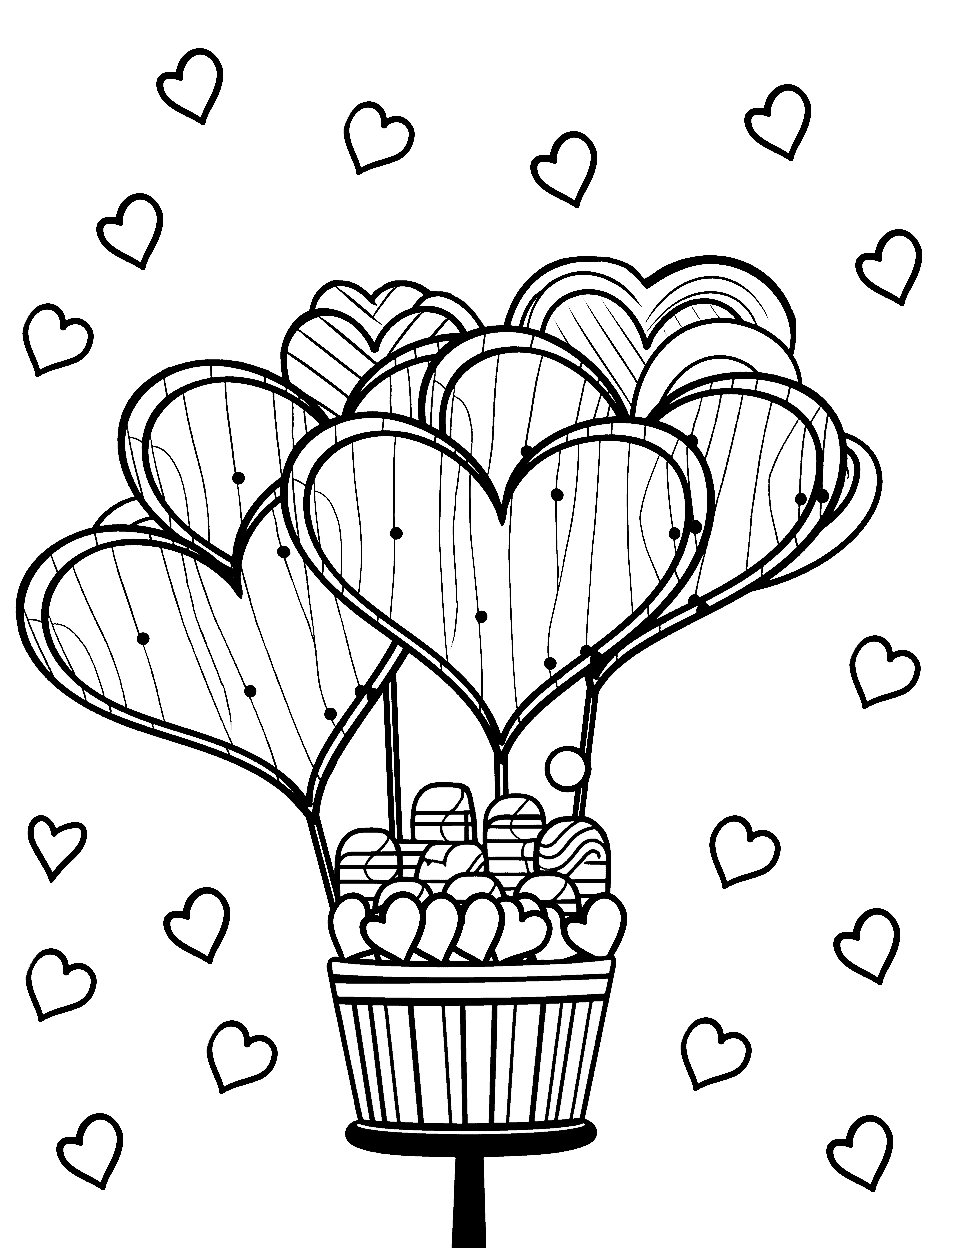 Sweetheart Valentine's Party Candy Coloring Page - A Valentine’s Day party scene with heart-shaped candies and decorations.